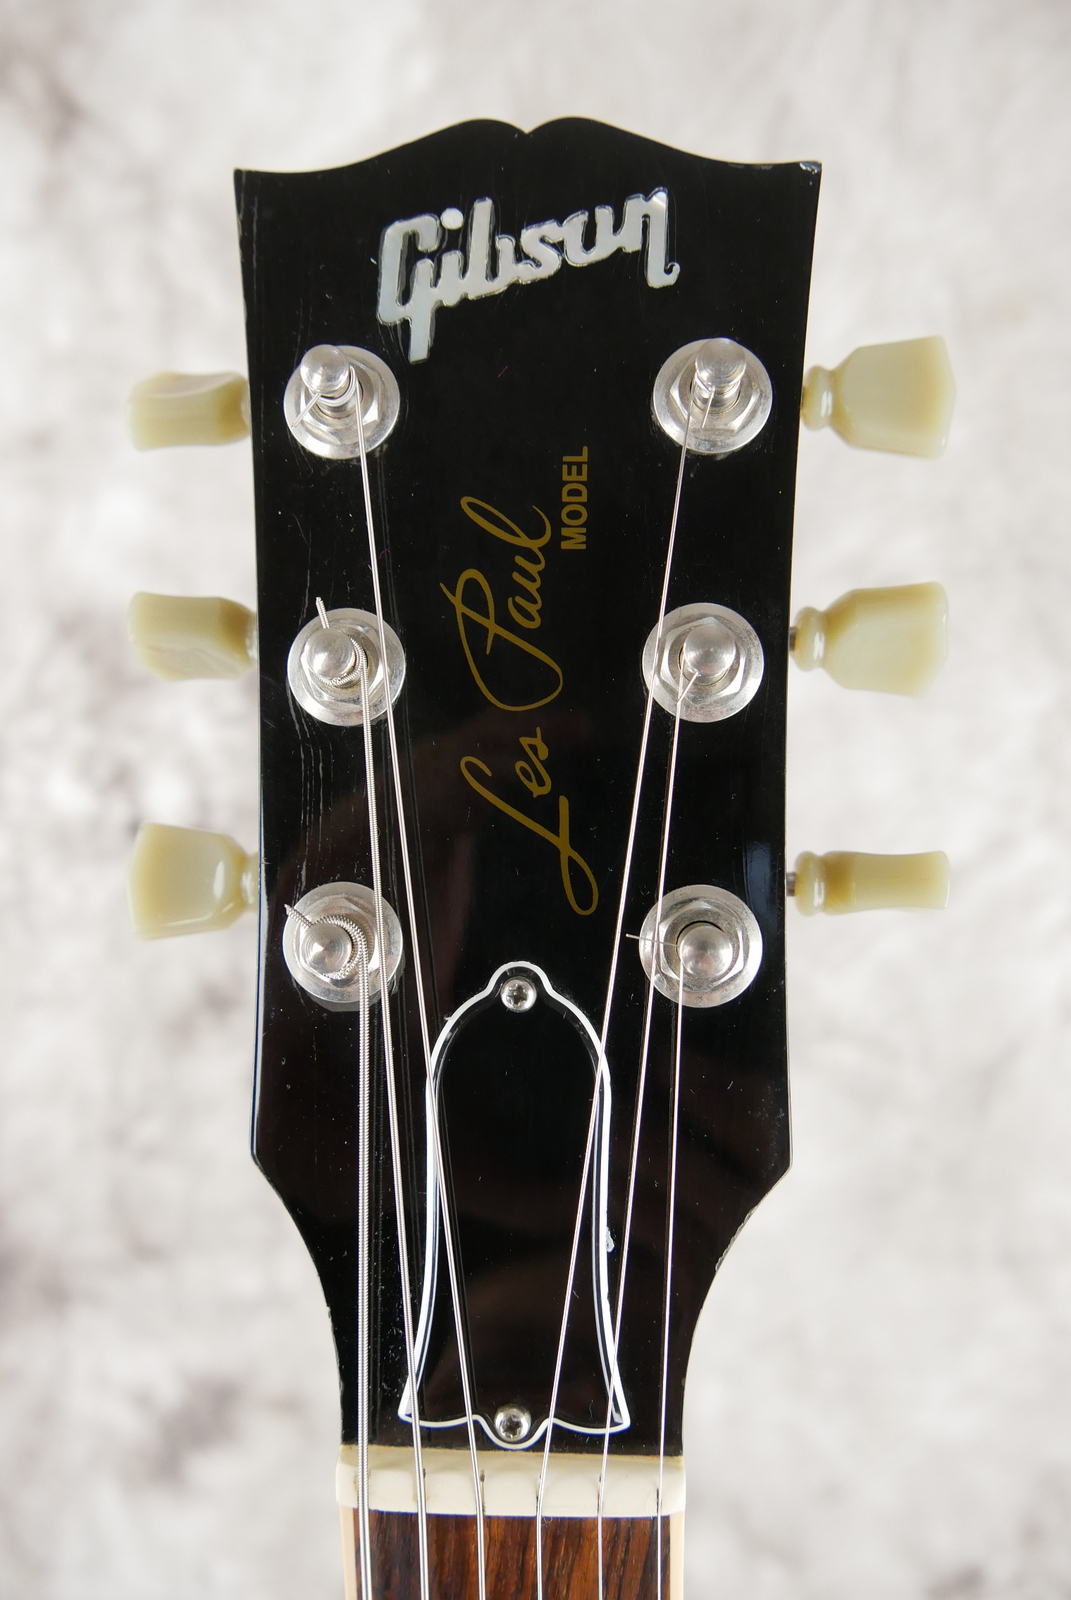 img/vintage/5337/Gibson_Les_Paul_Deluxe_limited_edtion_black_2000-009.JPG